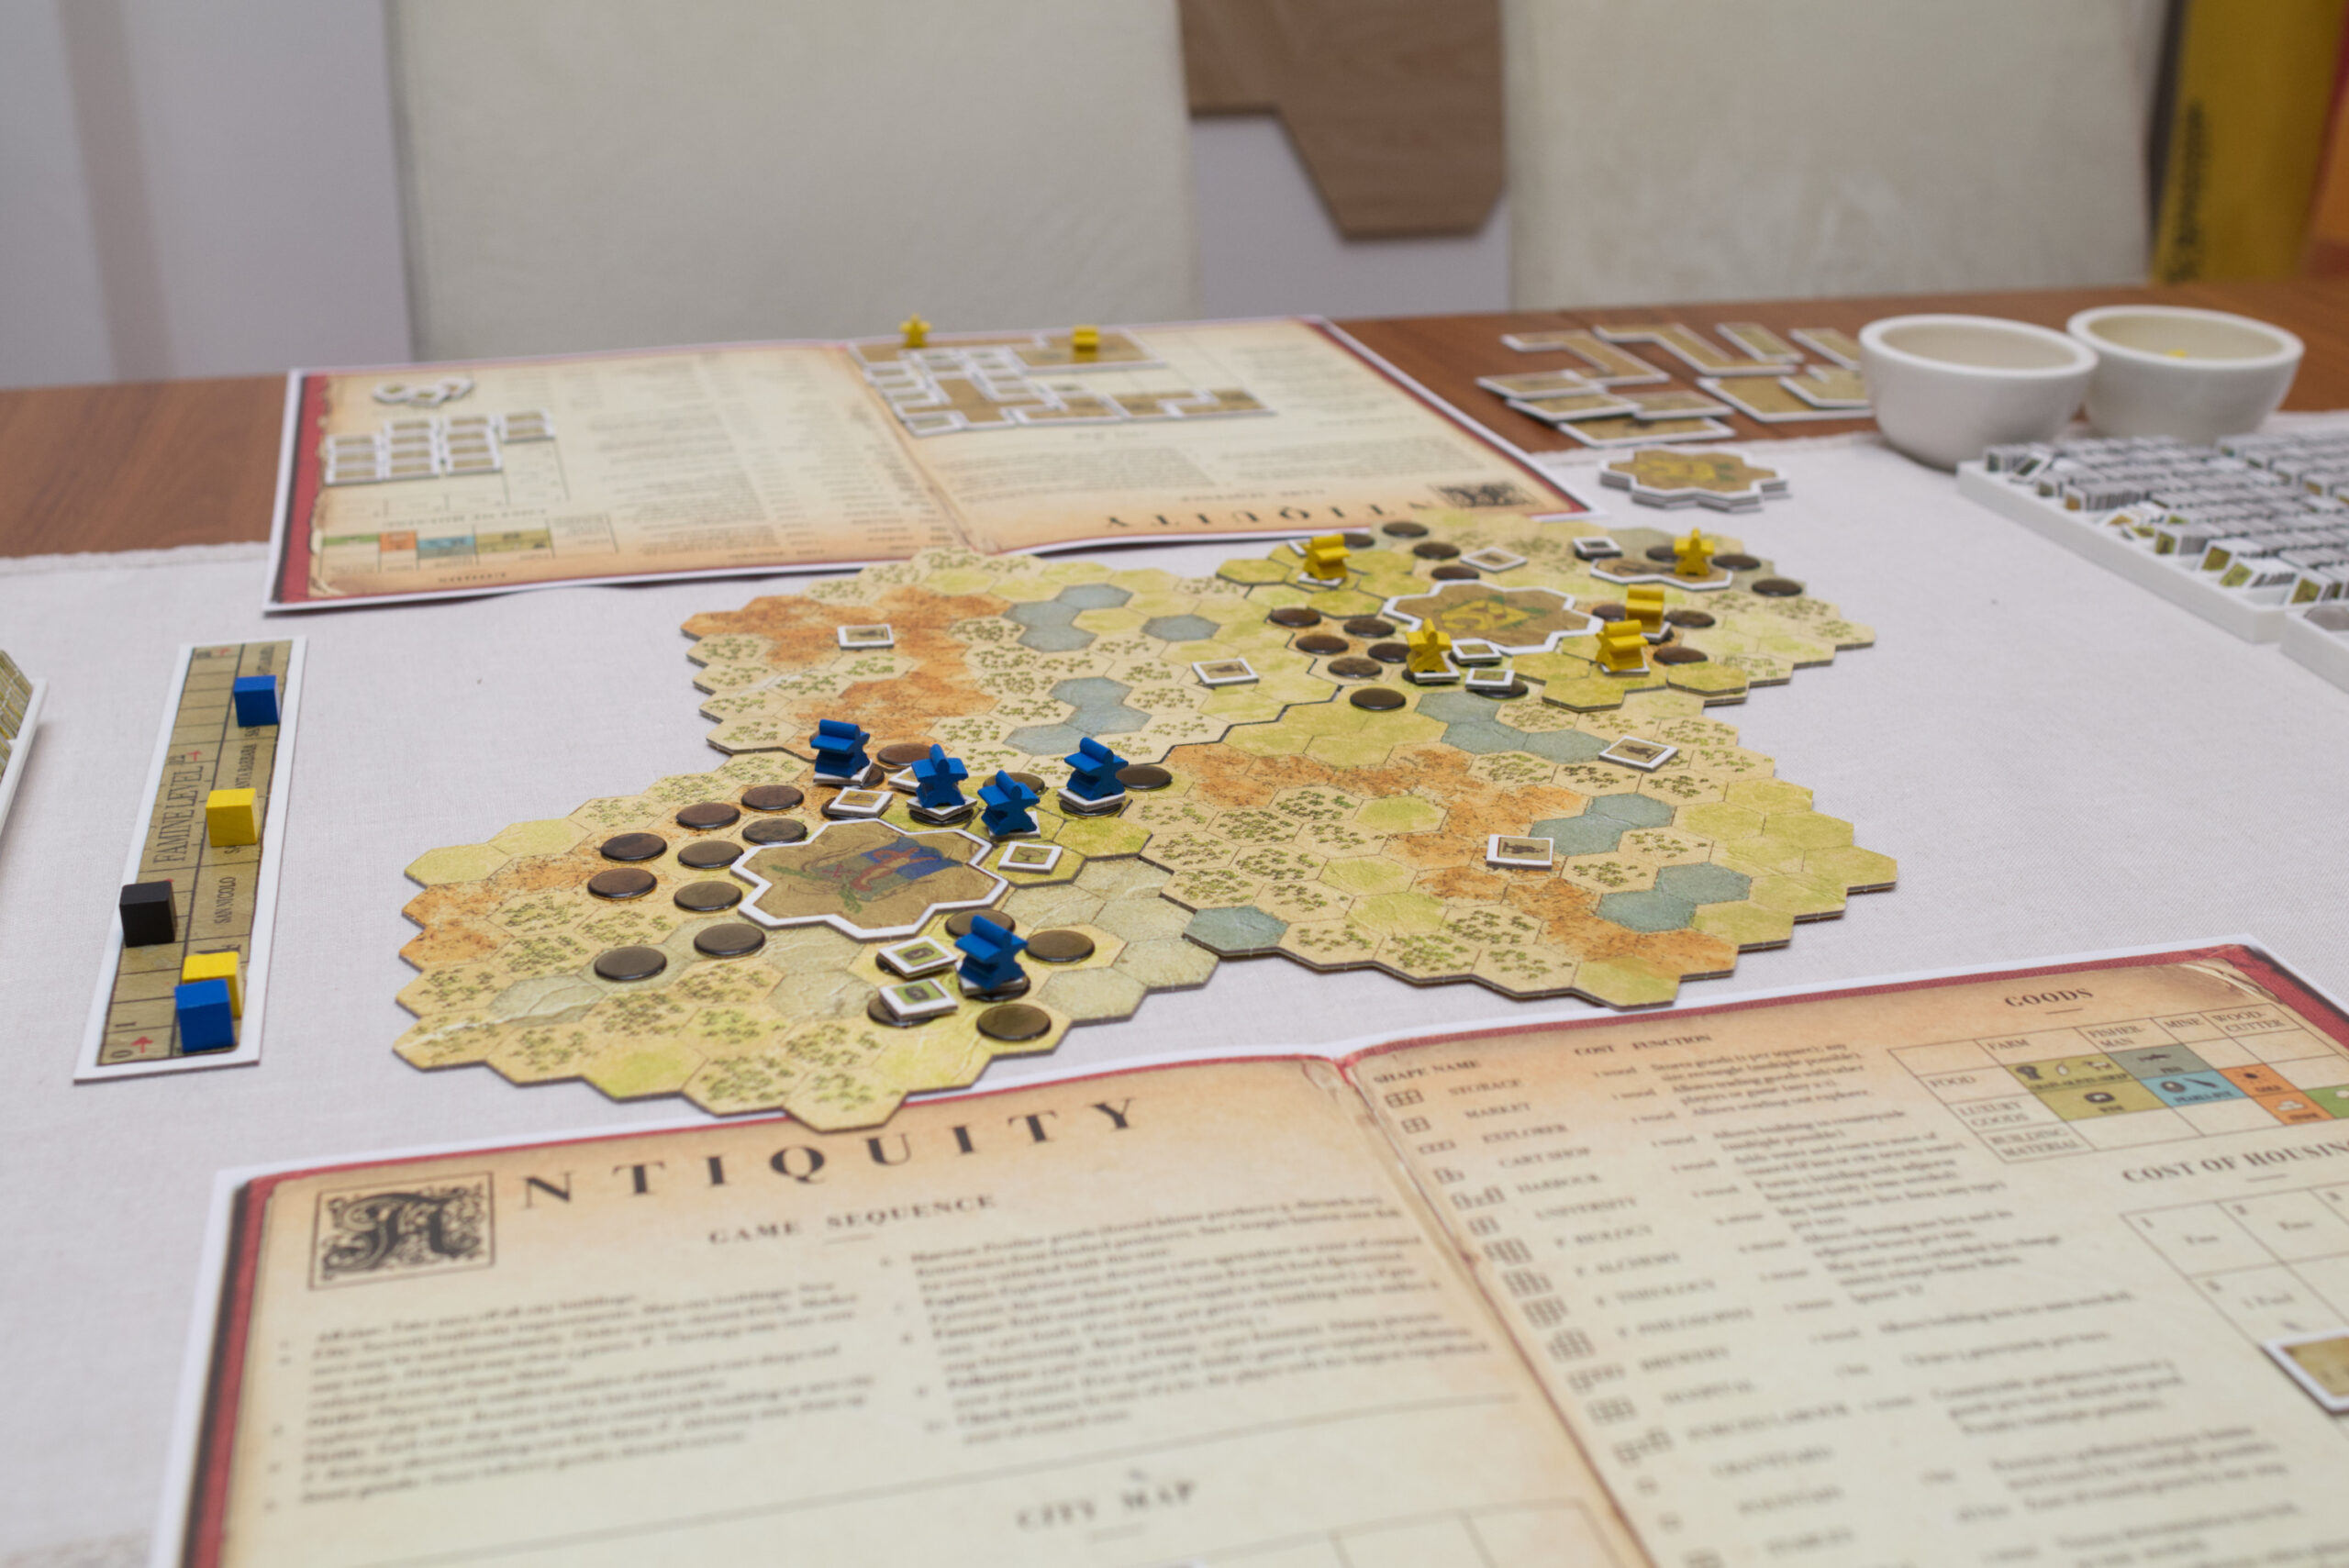 Review of Antiquity – A Blast From the Past